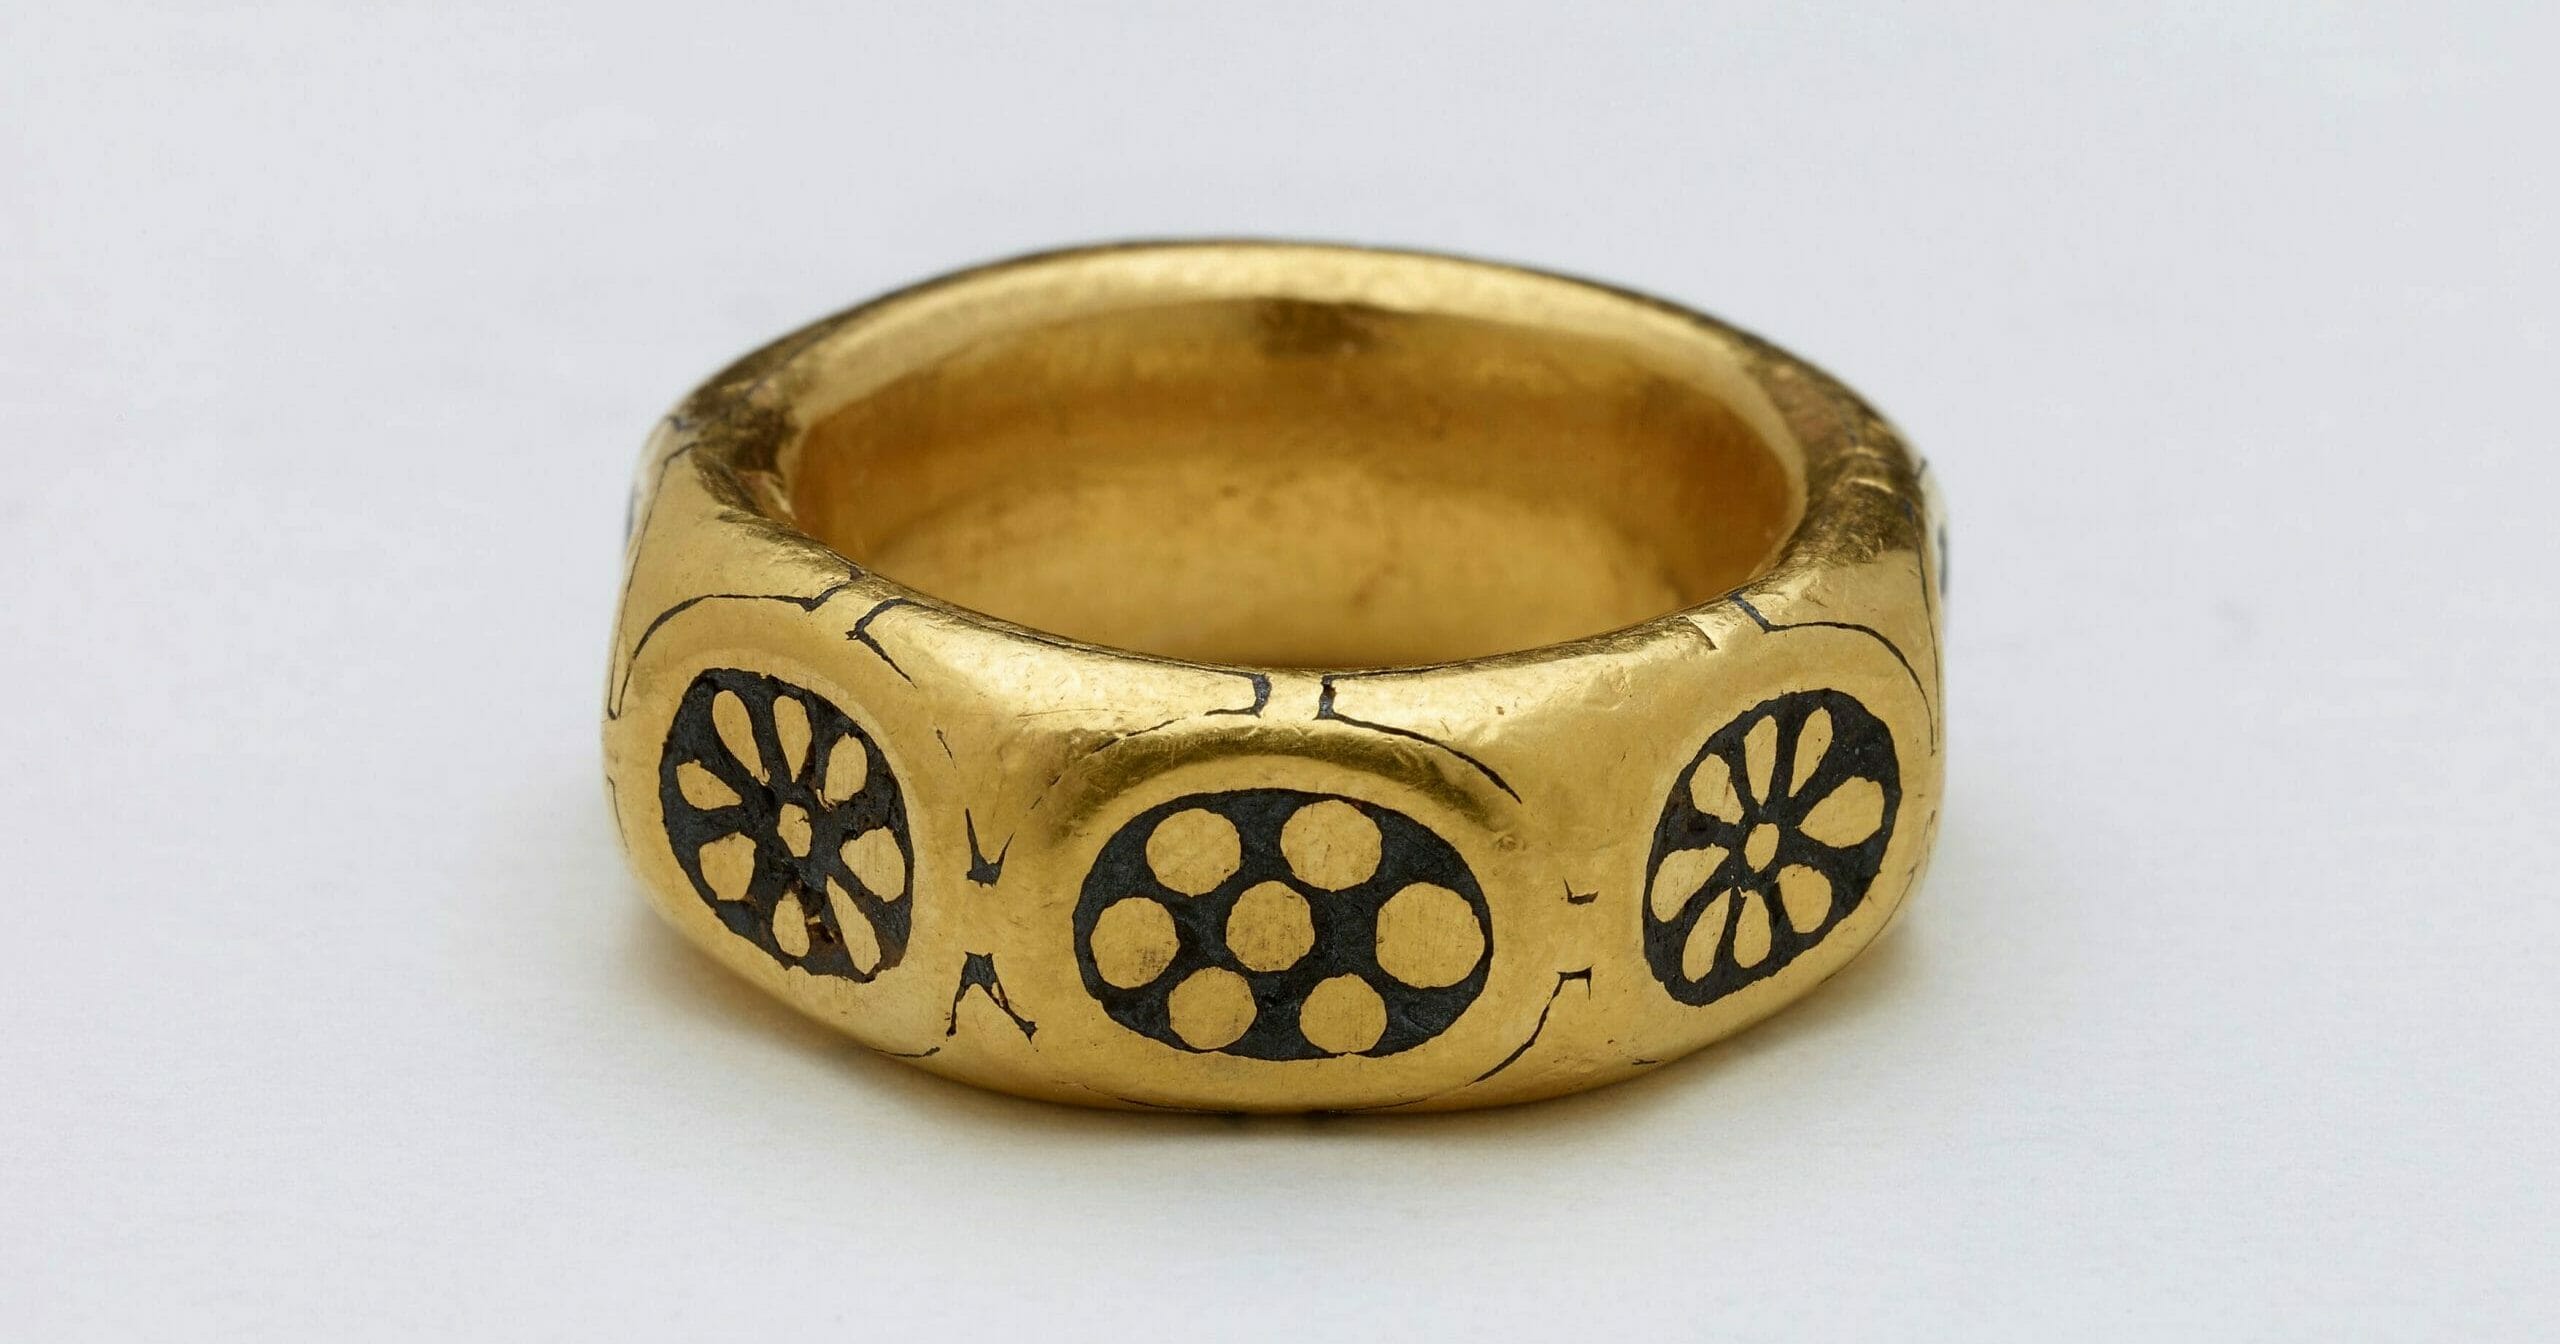 This undated handout photo provided by the British Museum shows a gold ring from the ninth century which was part of a £3 million Viking hoard, metal detectorists George Powell and Layton Davies have been convicted of stealing.